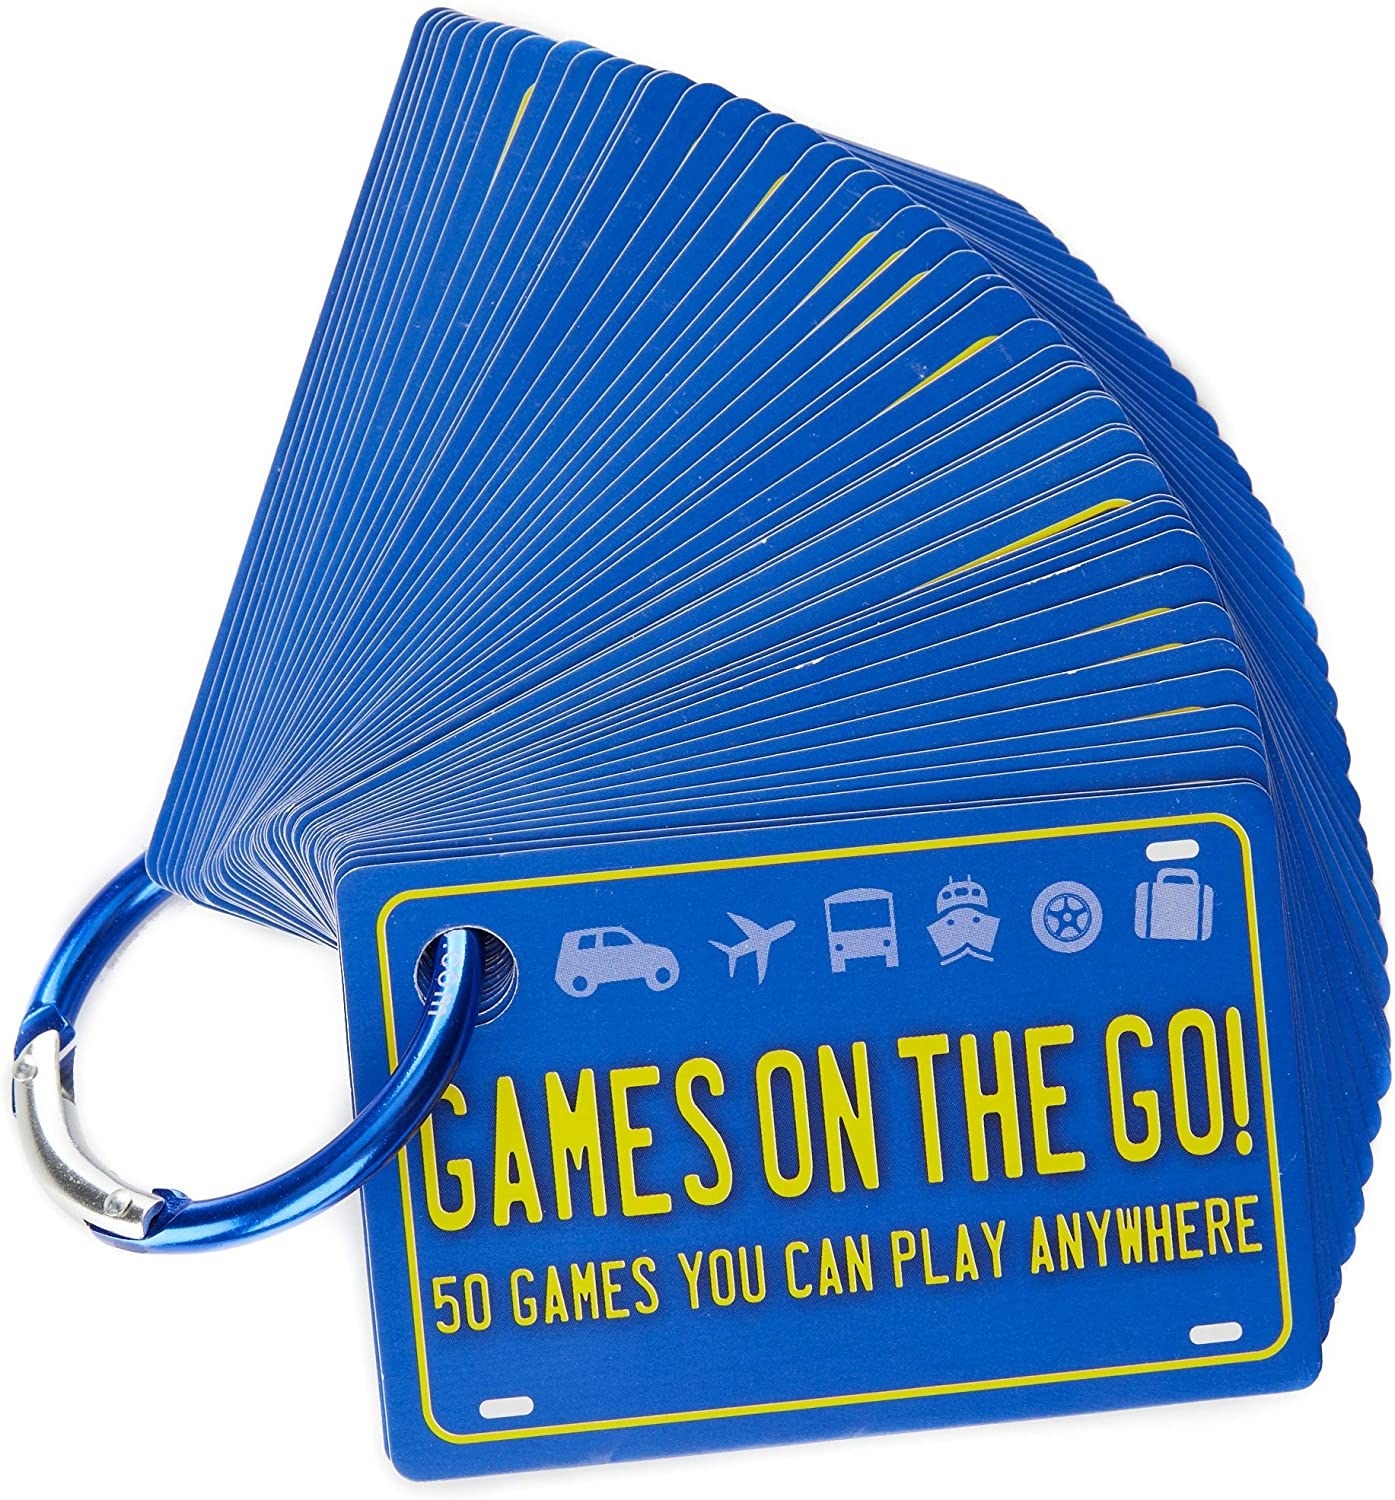 Games on the Go! attached to a keyring